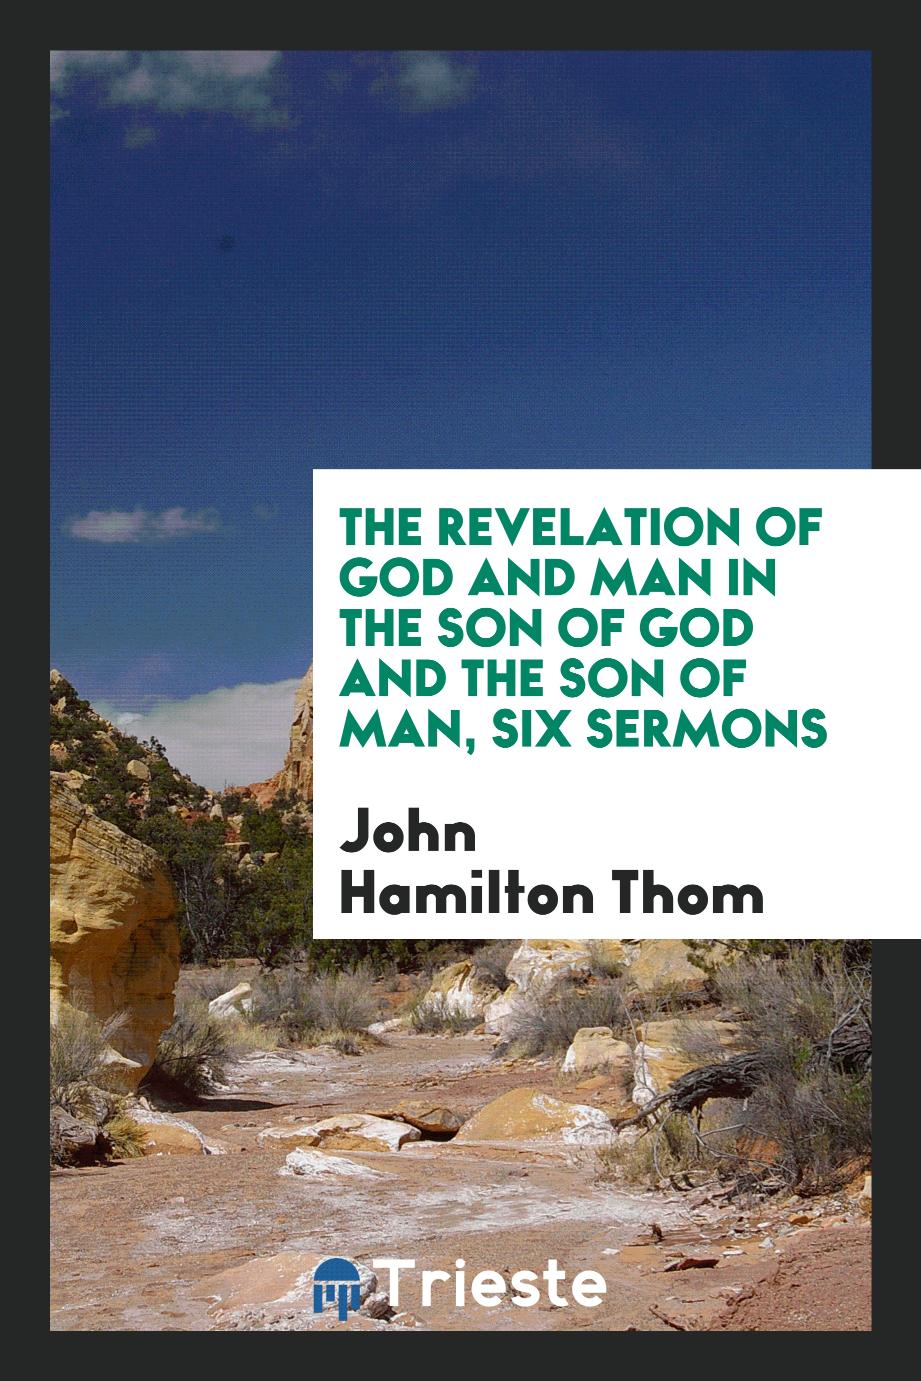 The Revelation of God and Man in the Son of God and the Son of Man, Six Sermons